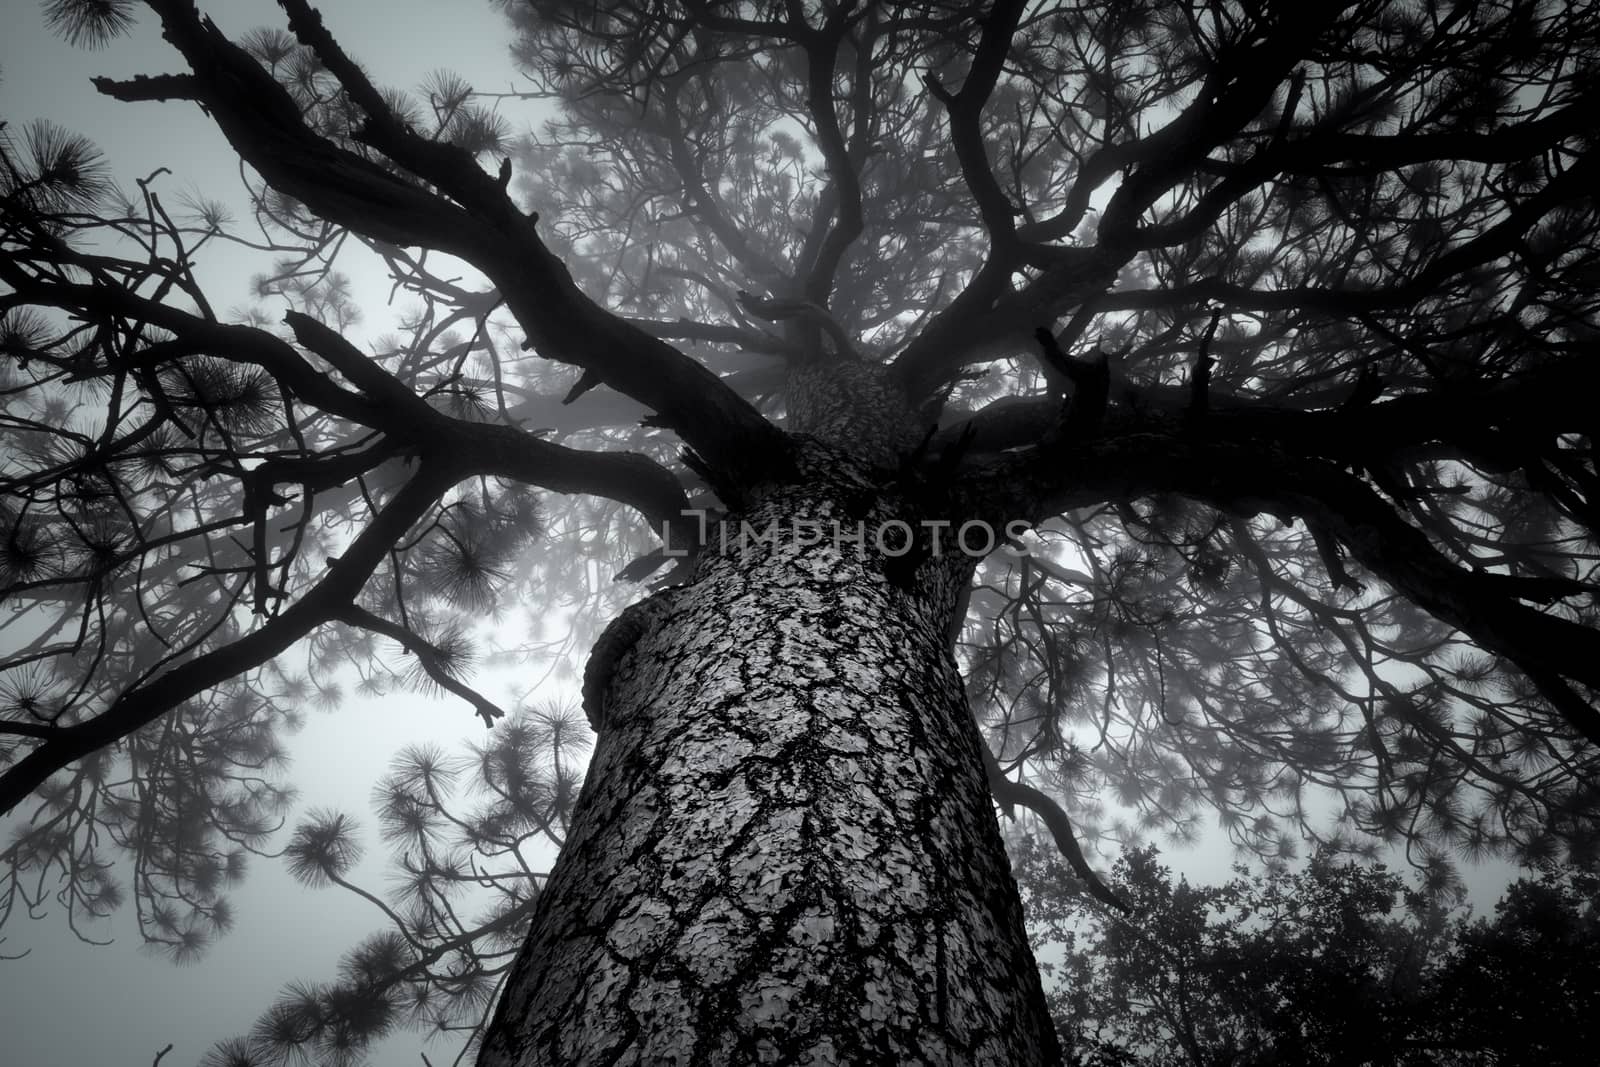 Foggy overhangs canopy of large tree in black and white.